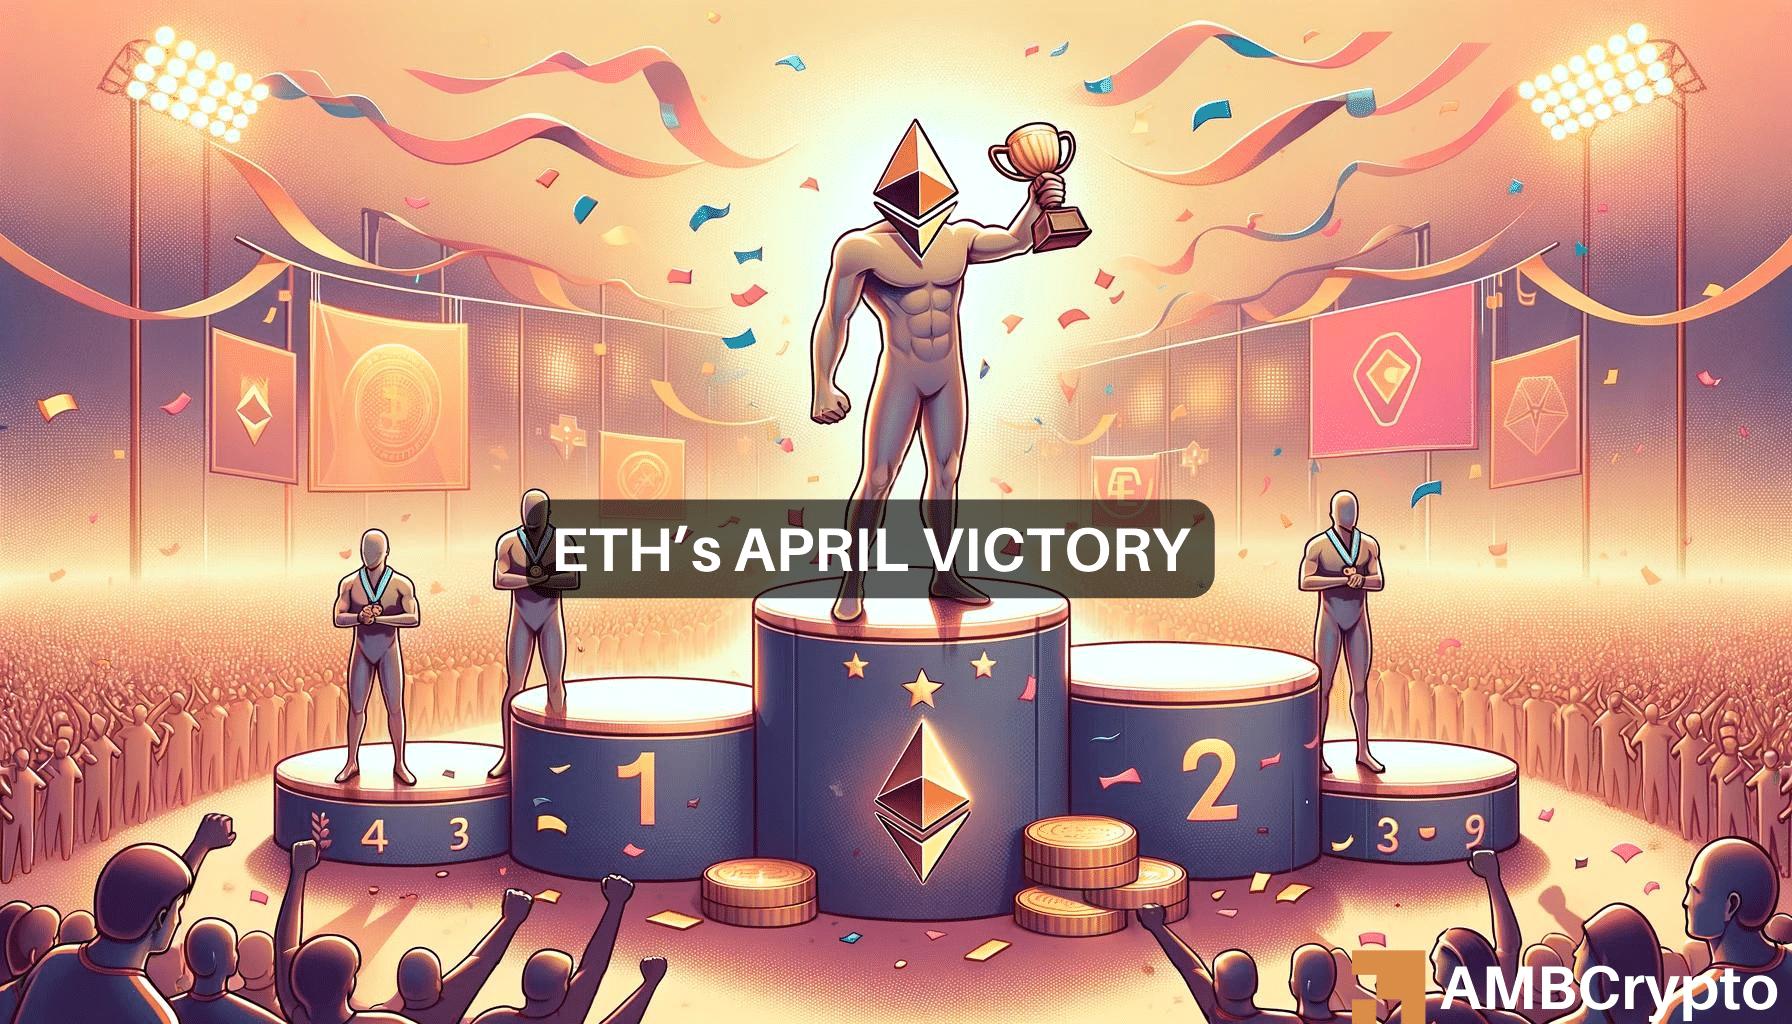 Ethereum: DAI stablecoin takes the cake in April, more inside